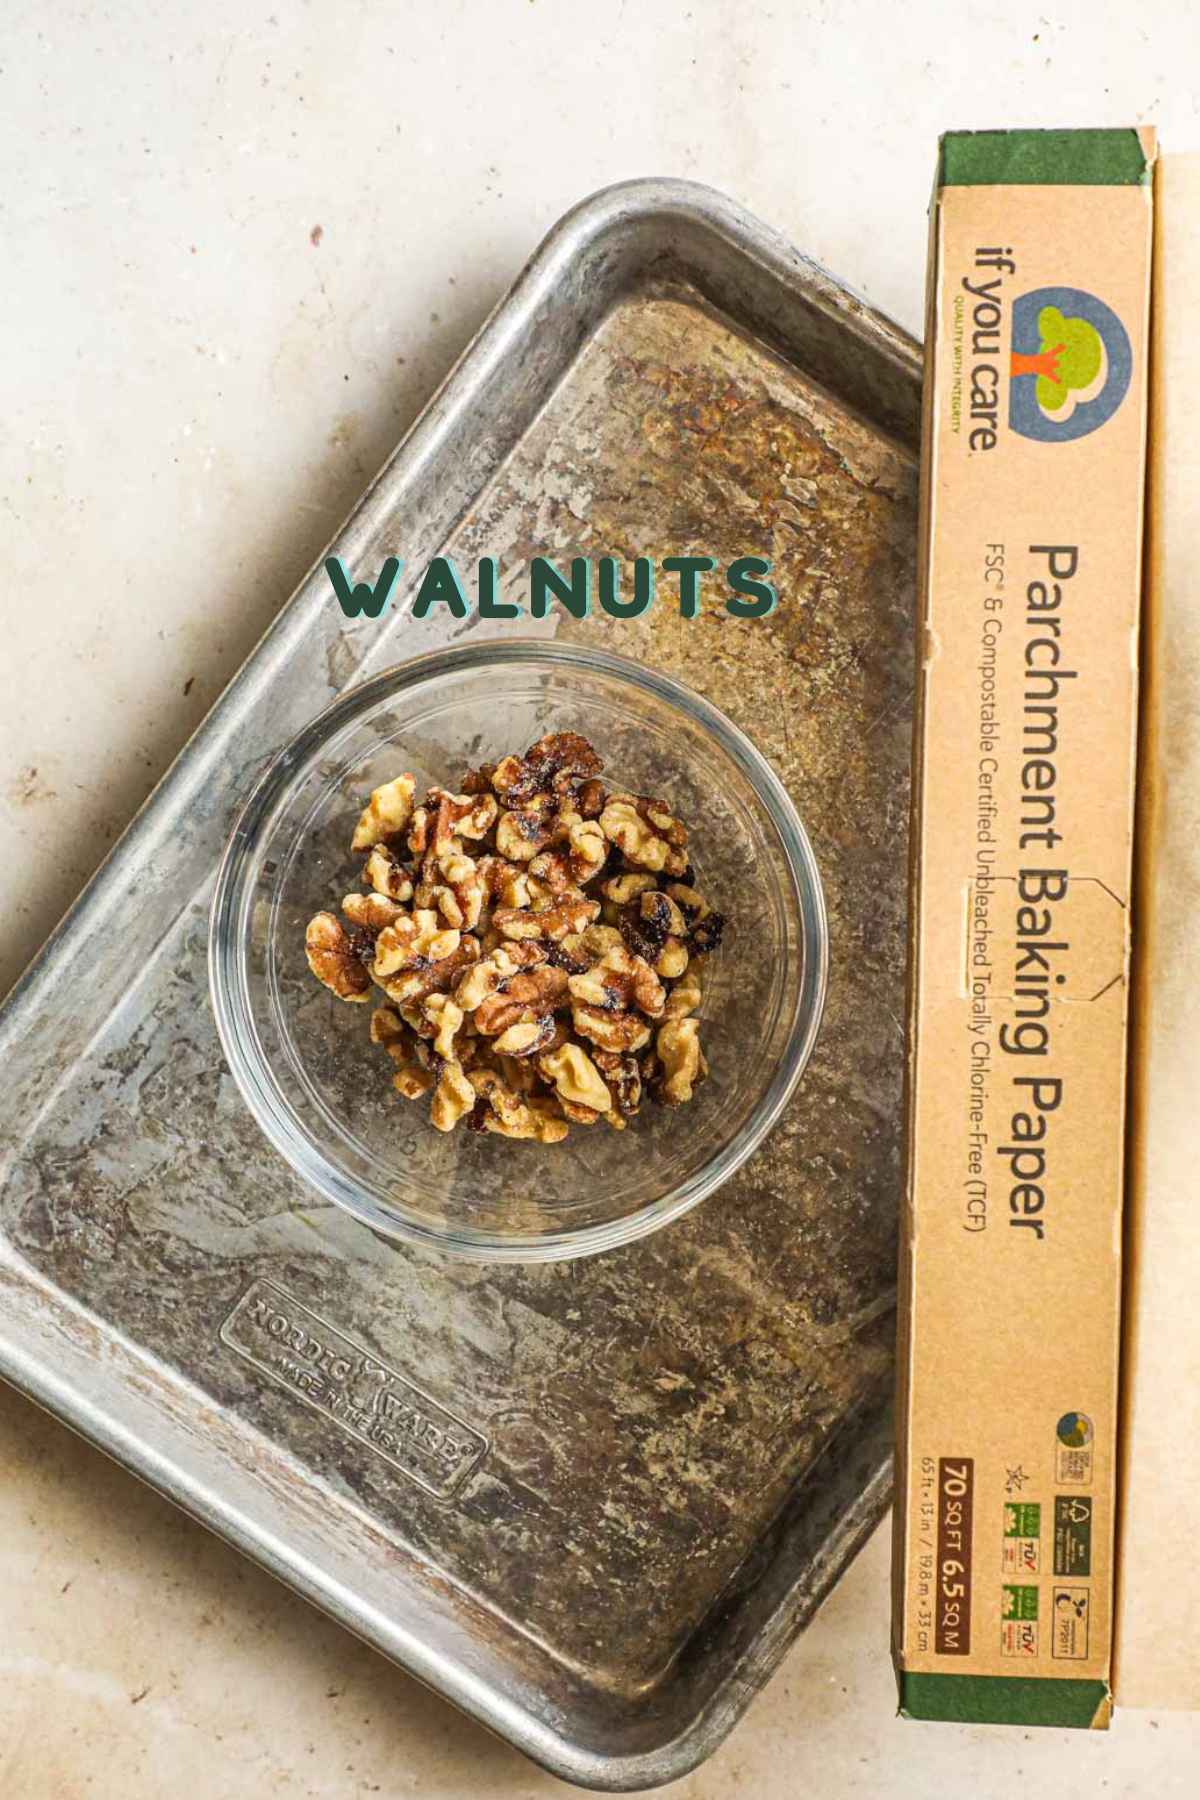 Ingredients to make roasted walnuts, including walnuts, parchment paper, and baking sheets.